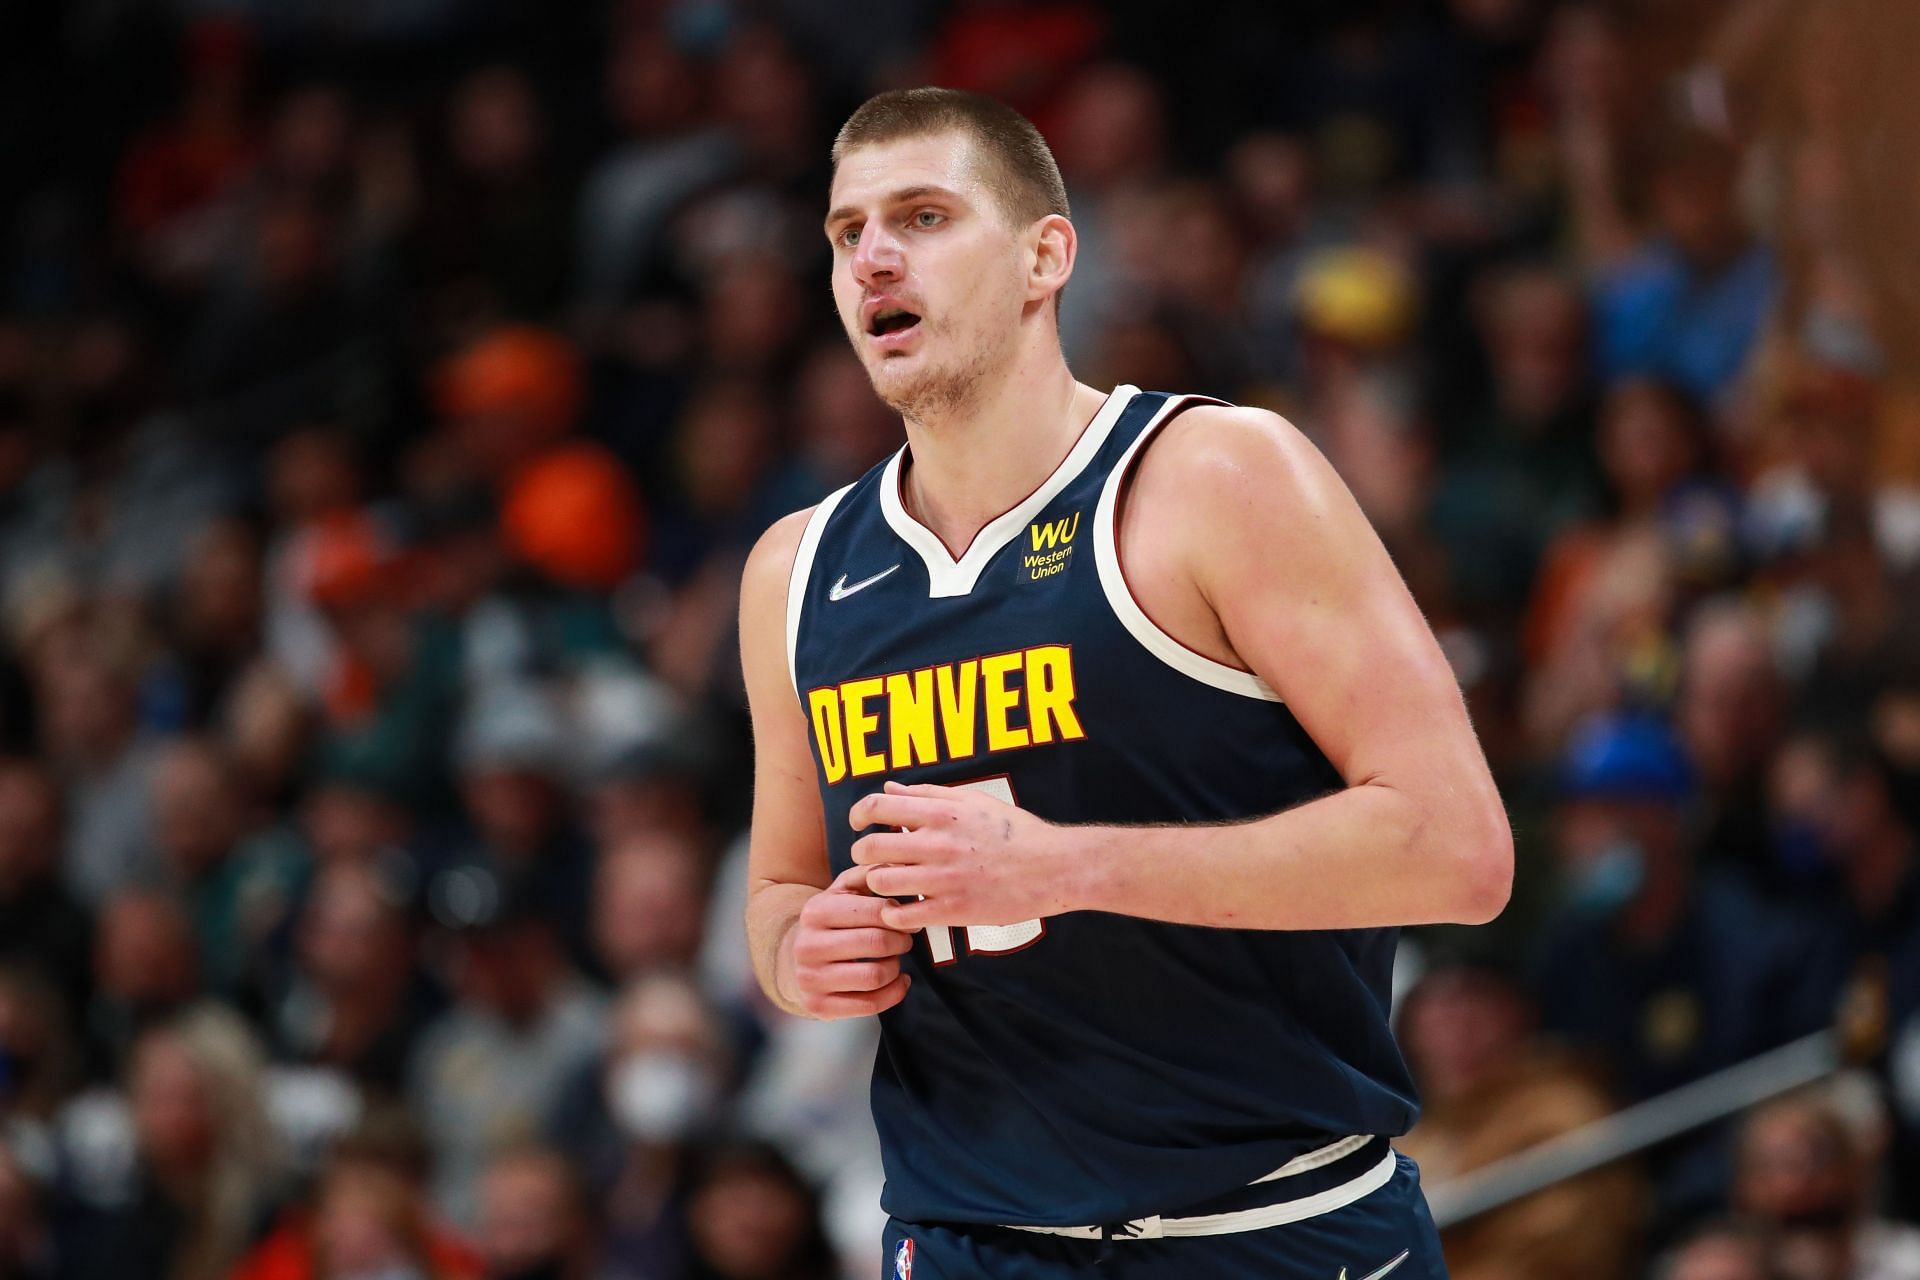 Nikola Jokic #15 of the Denver Nuggets runs down the court during the game against the Portland Trail Blazers at Ball Arena on November 14, 2021, in Denver, Colorado.